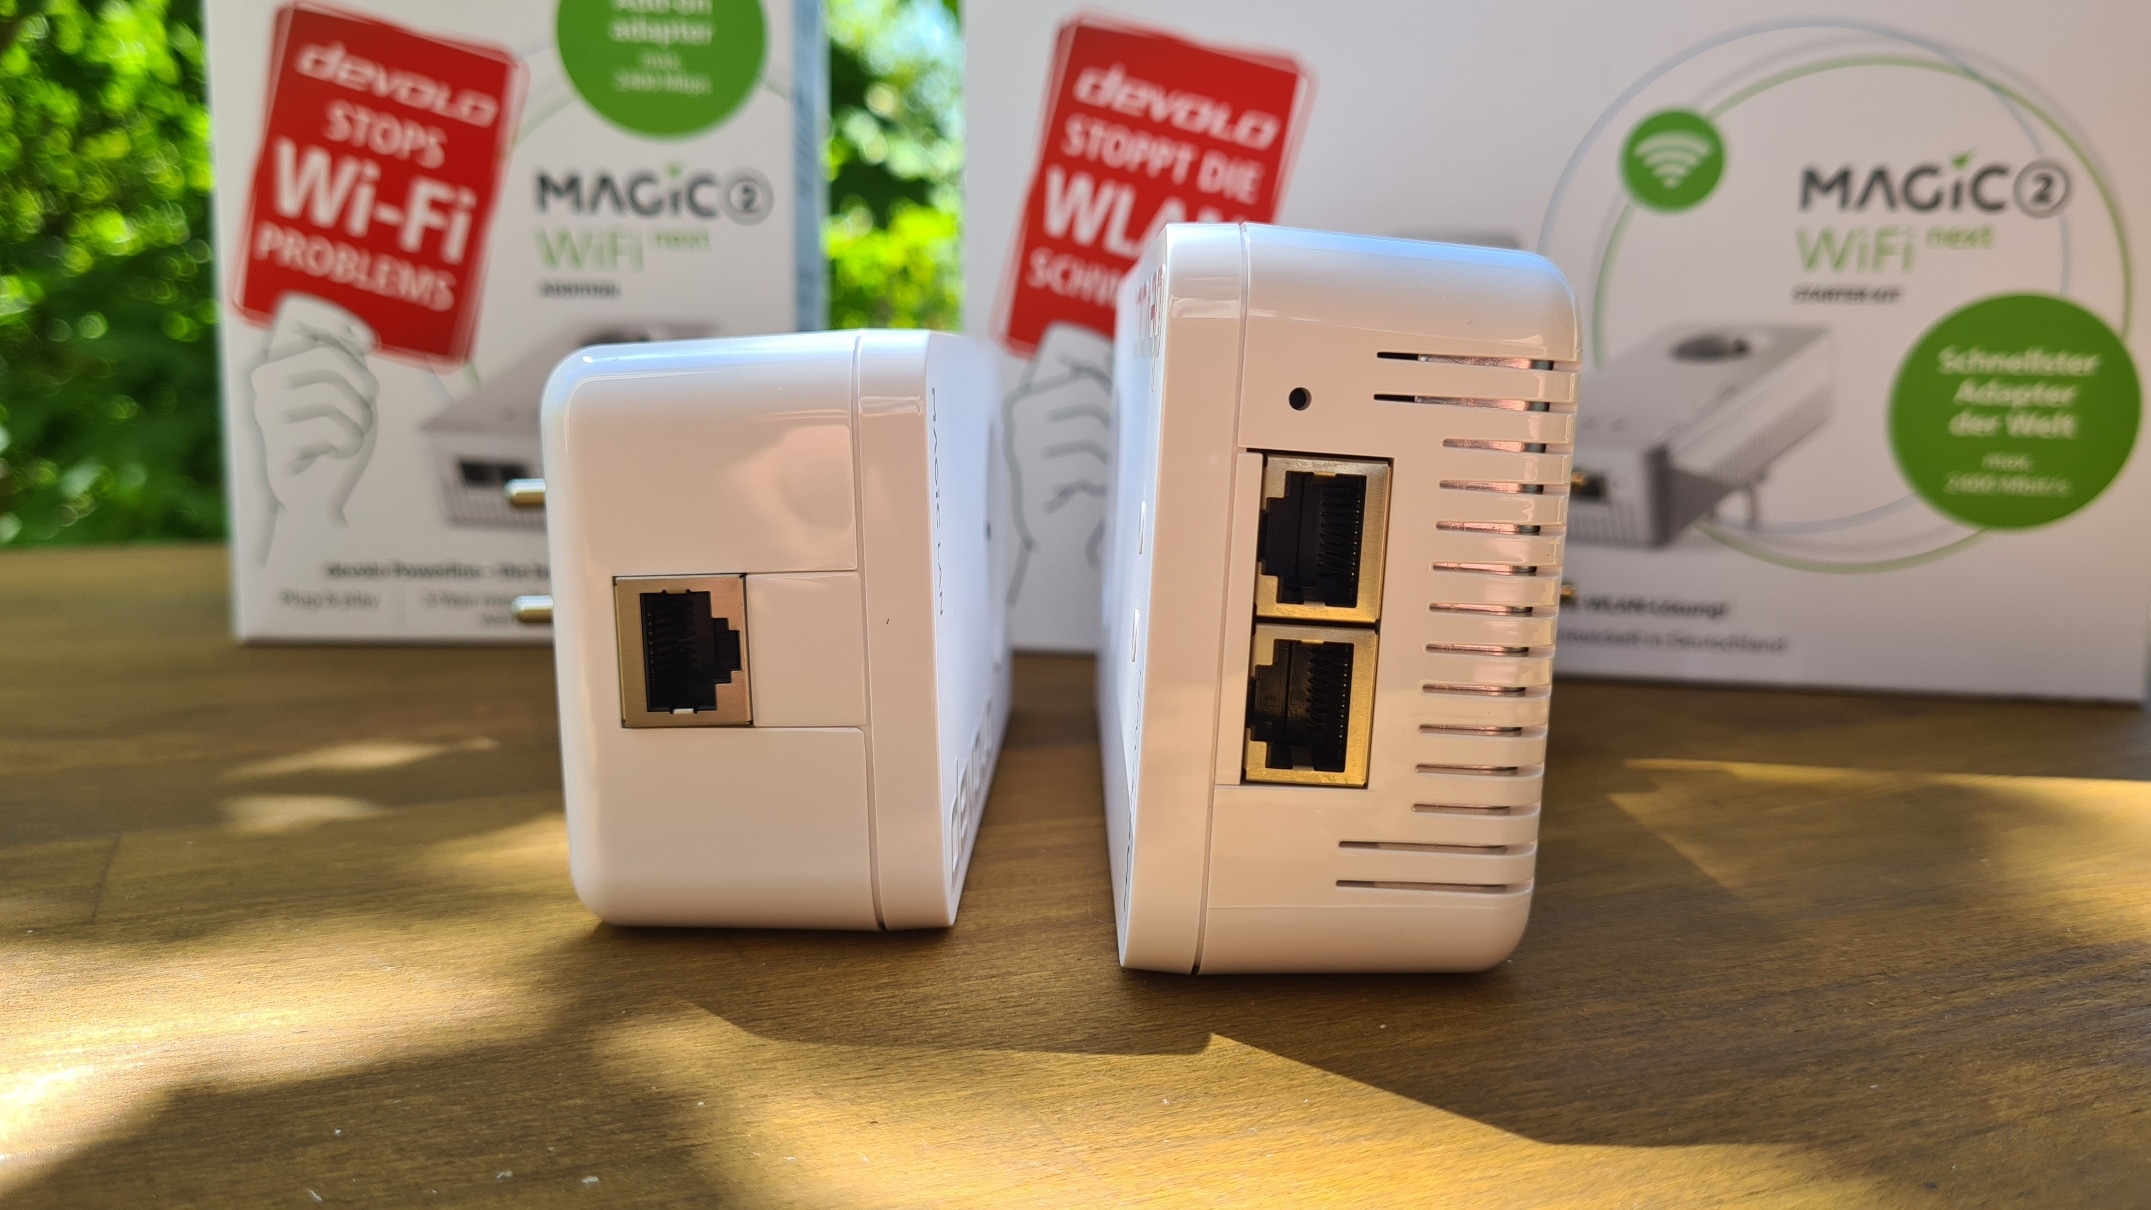 devolo Magic 2 WiFi next in test - WLAN improvement for large apartments?